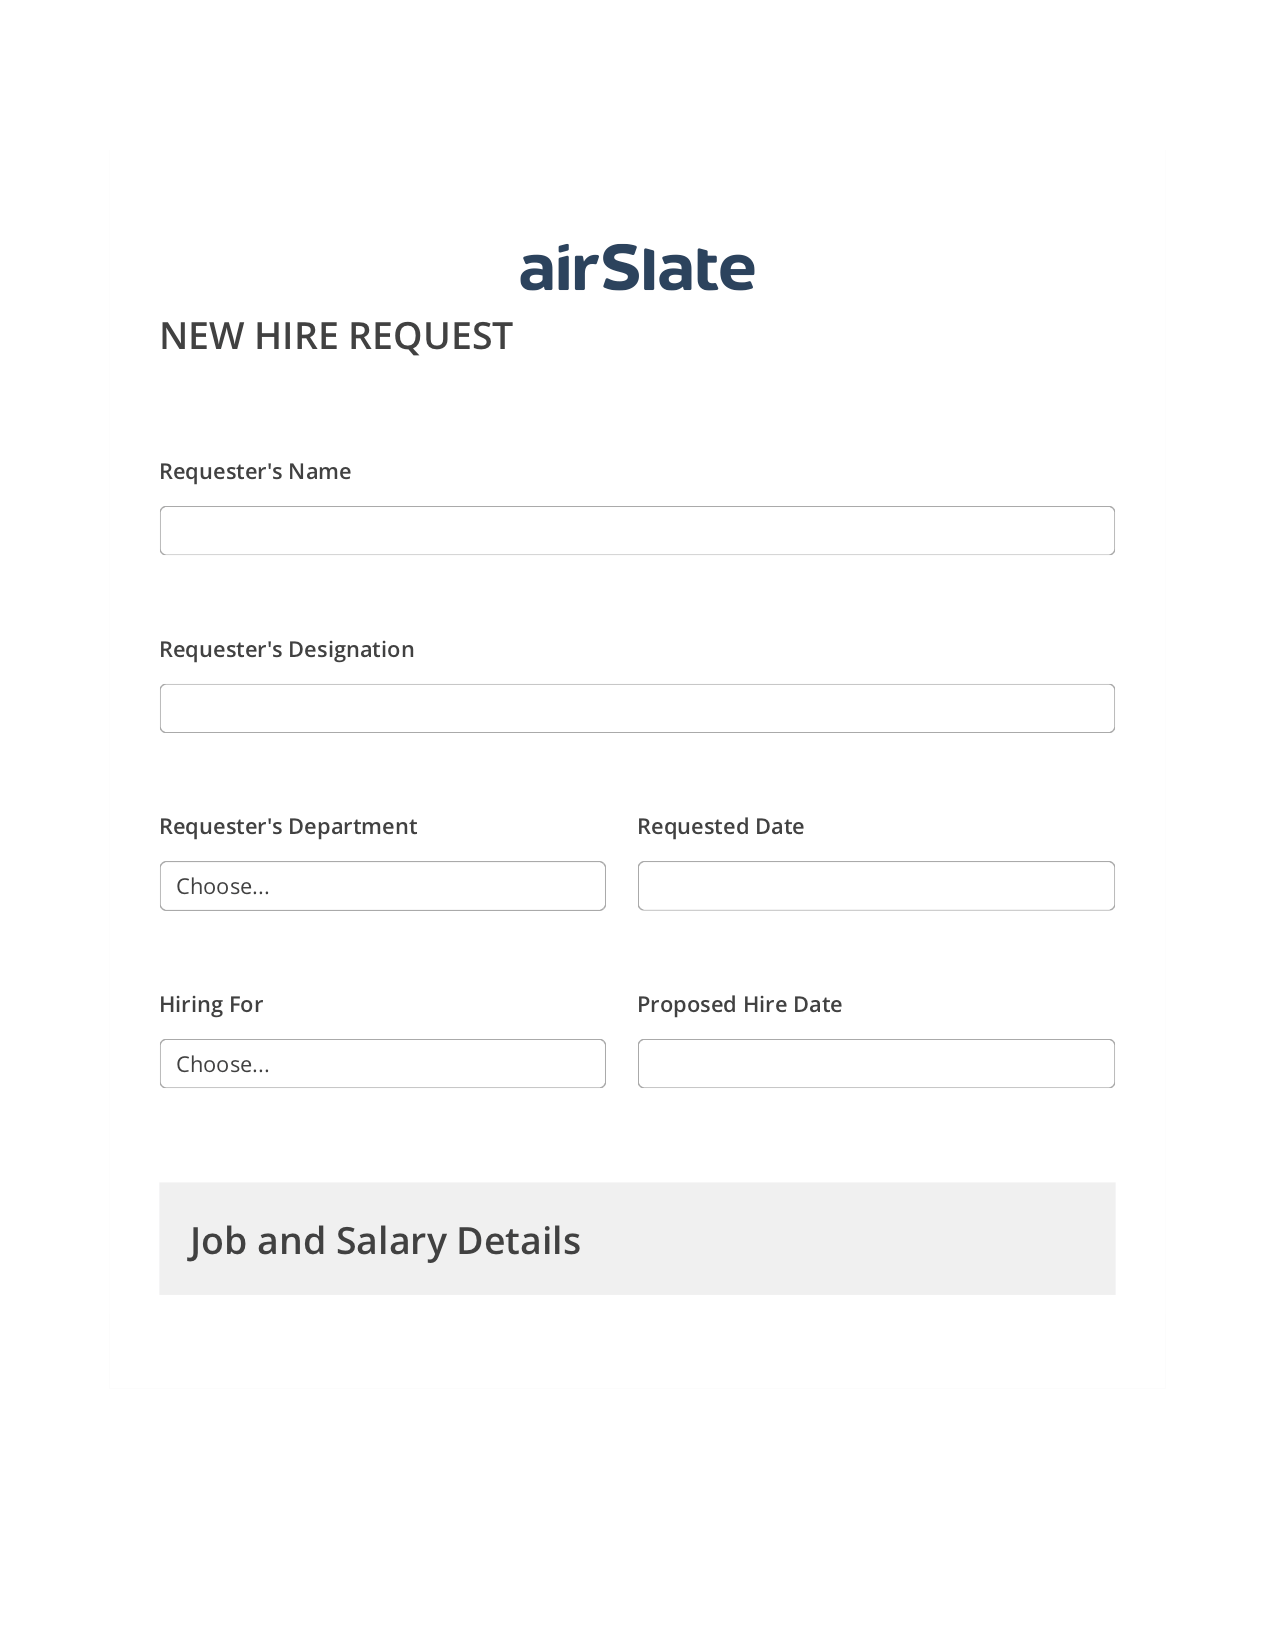 Multirole Hiring Request Workflow Pre-fill from Excel Spreadsheet Bot, Remove Tags From Slate Bot, Archive to OneDrive Bot